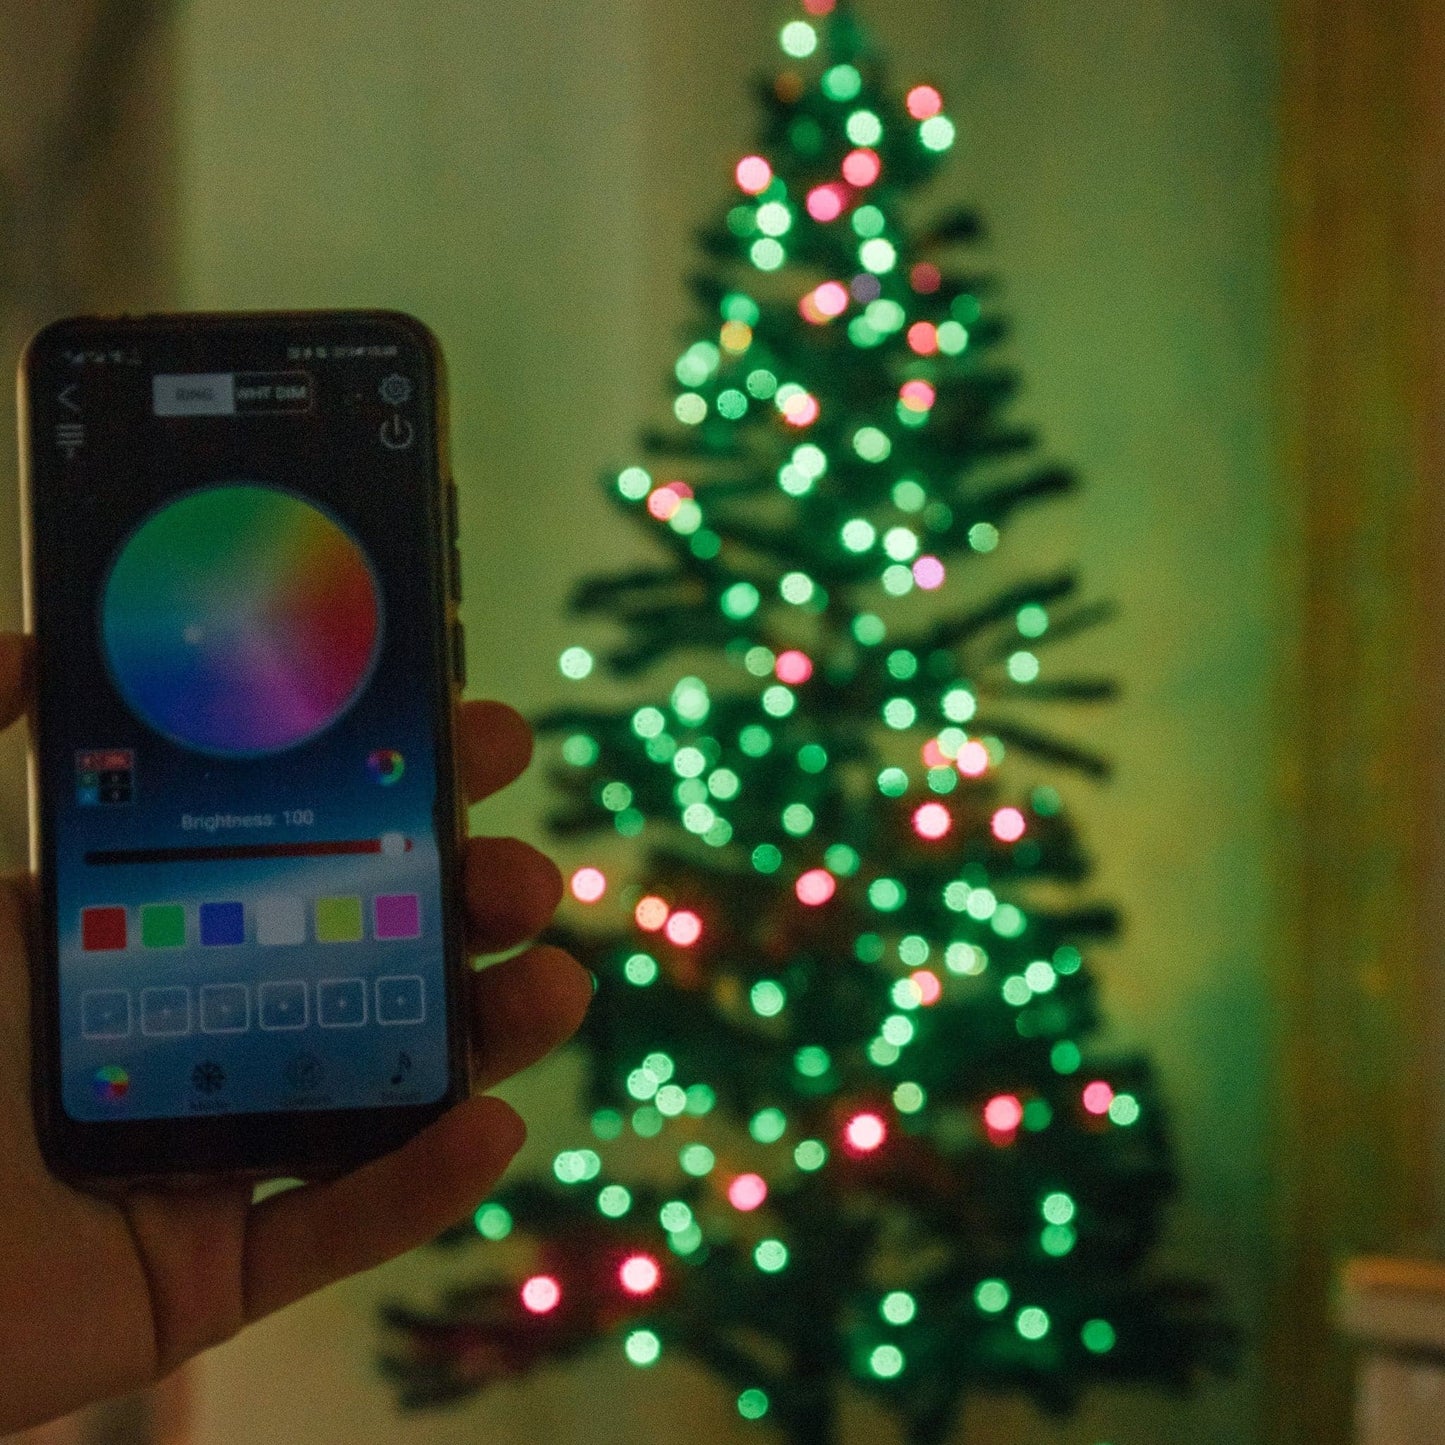 Phone Controlled LED Christmas Lights